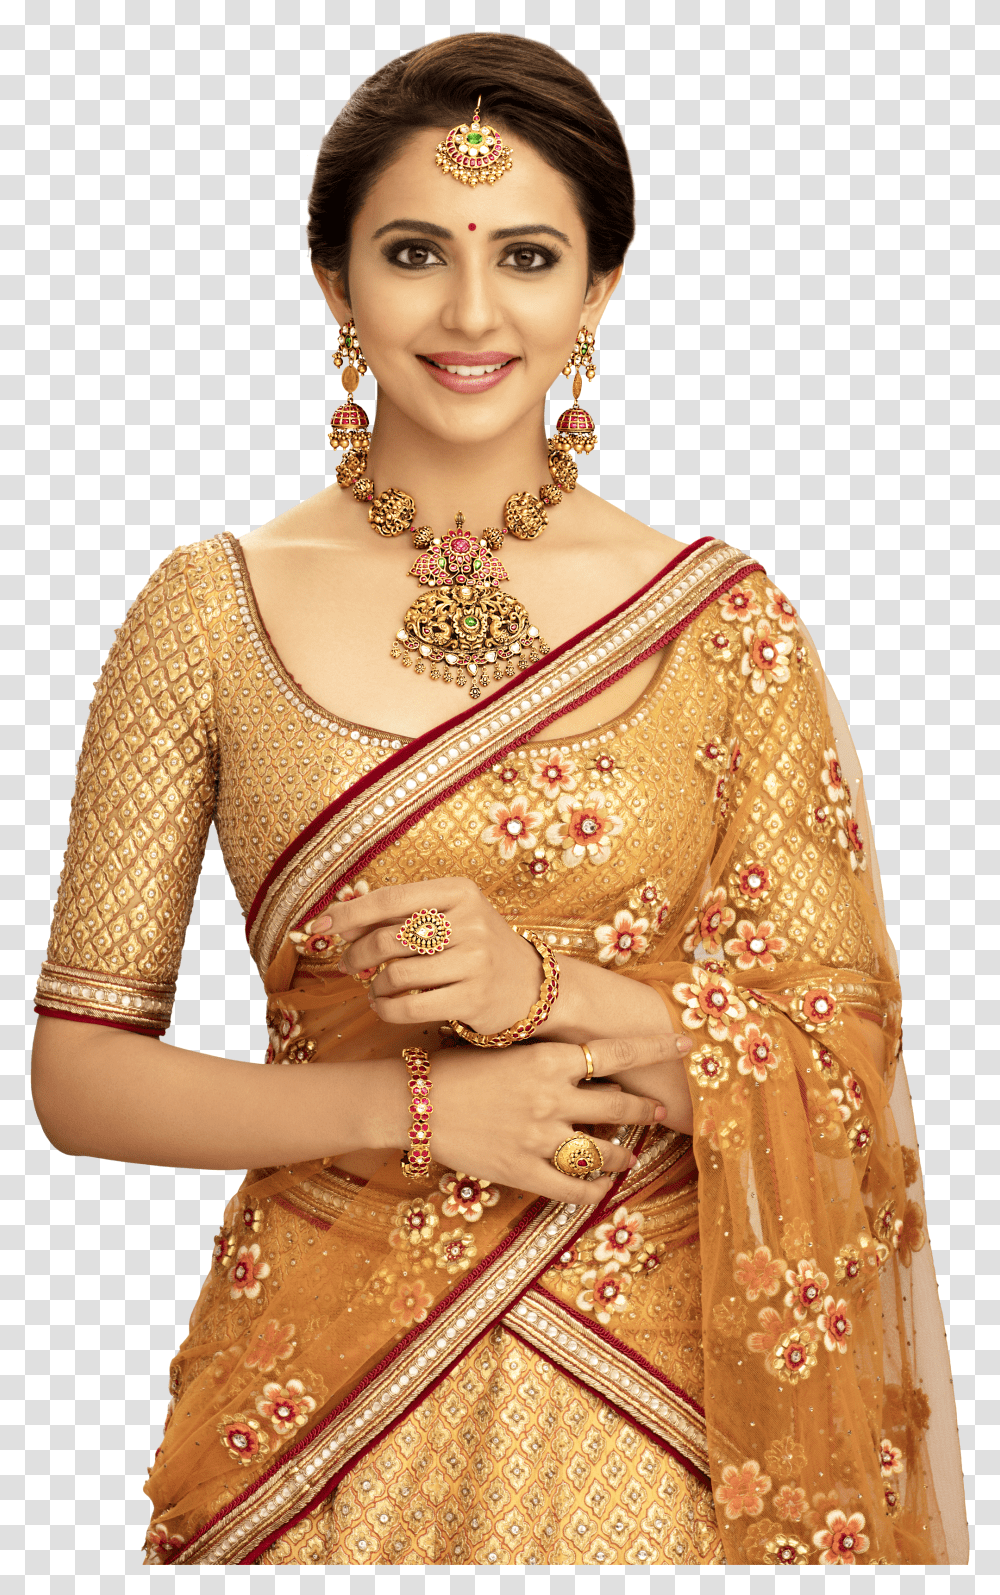 Simple Bridal Jewellery Jewellery Temple Designs Transparent Png